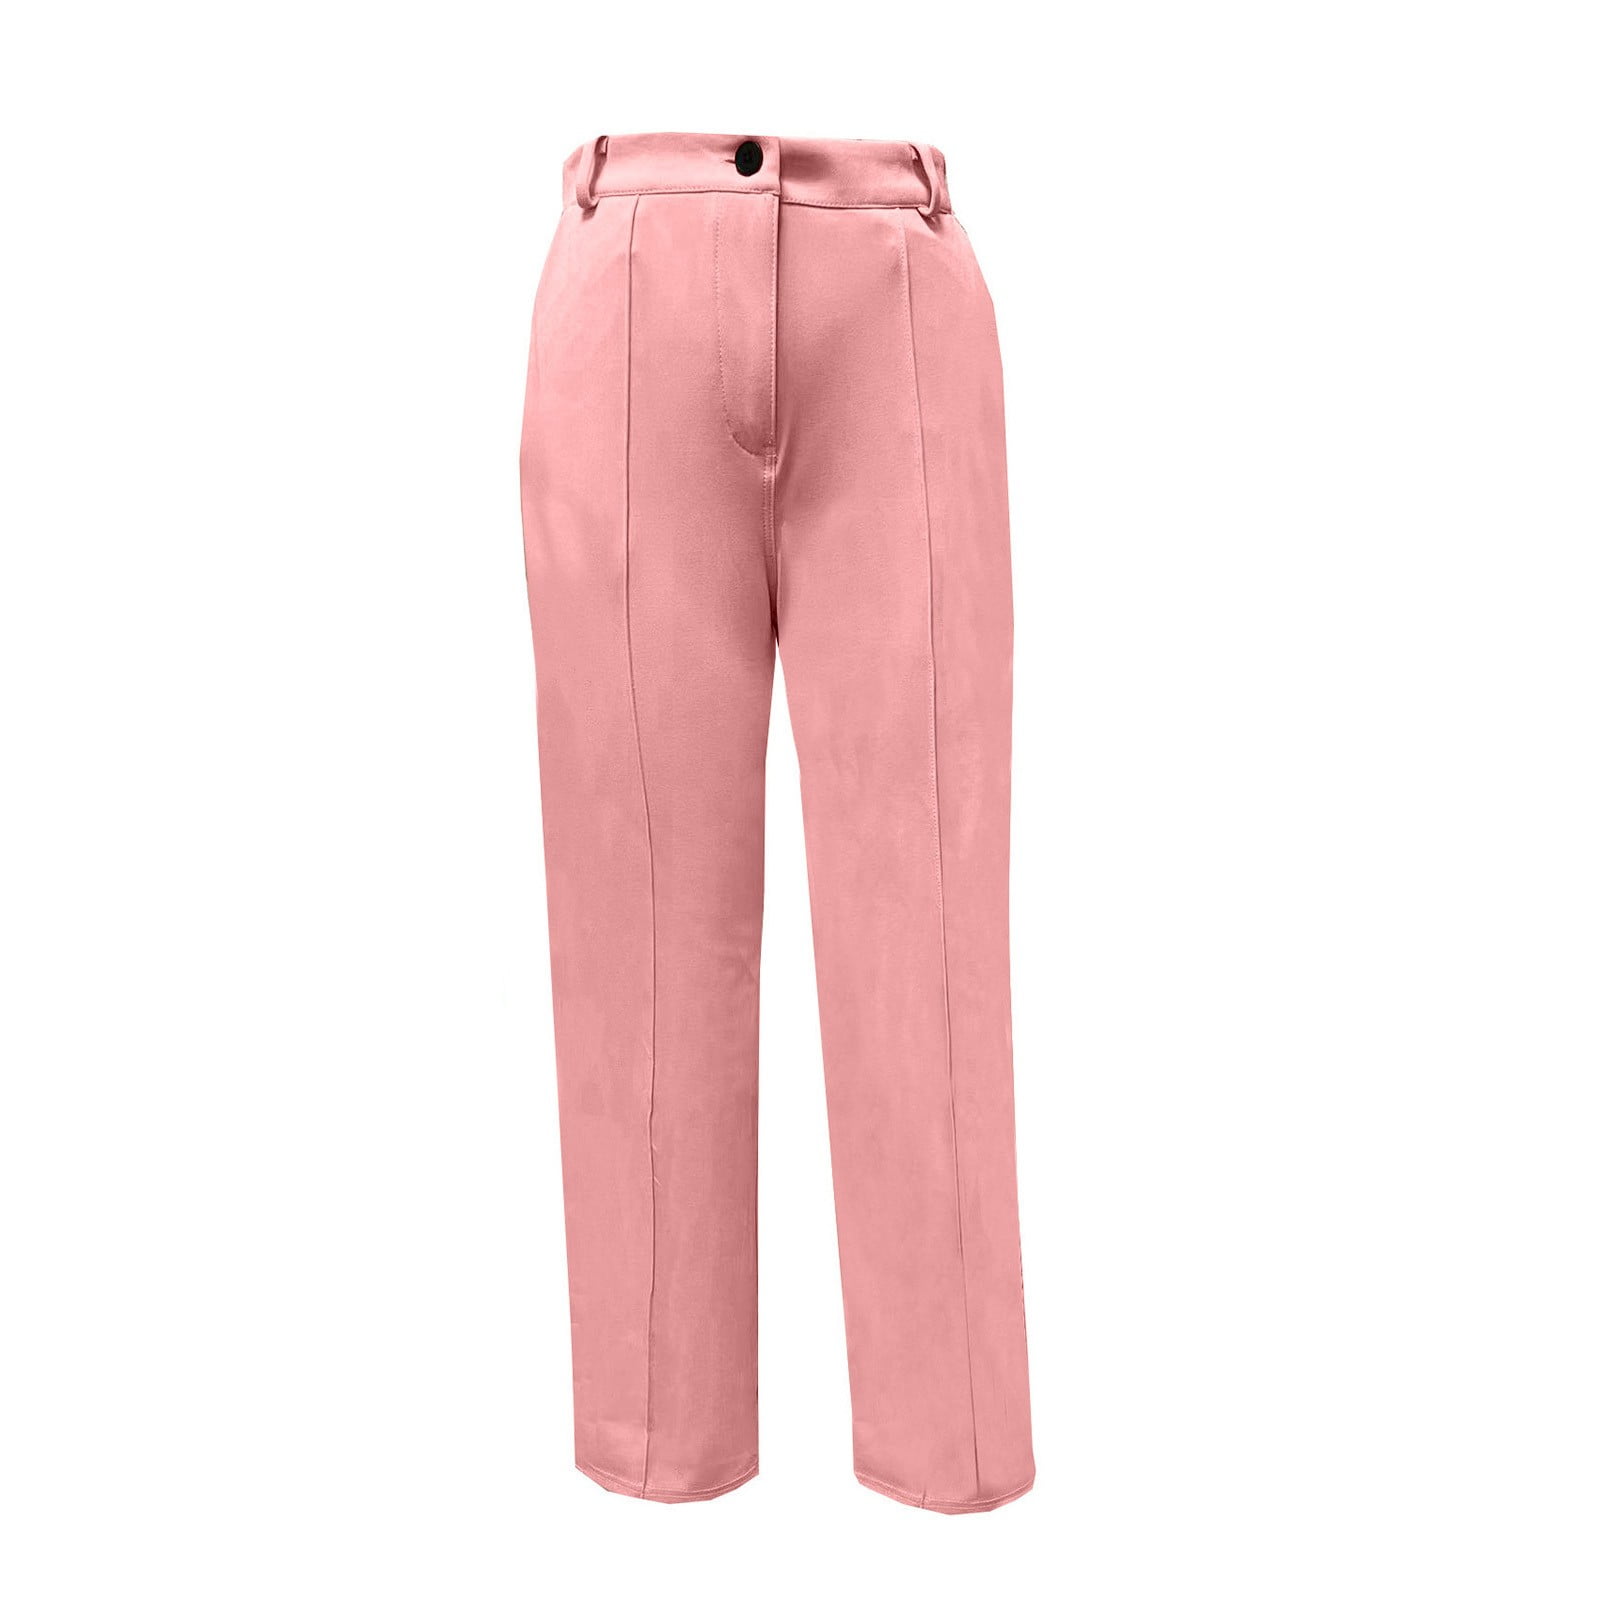 Plus Size Suit Pants for Women Straight Leg High Waisted Business ...